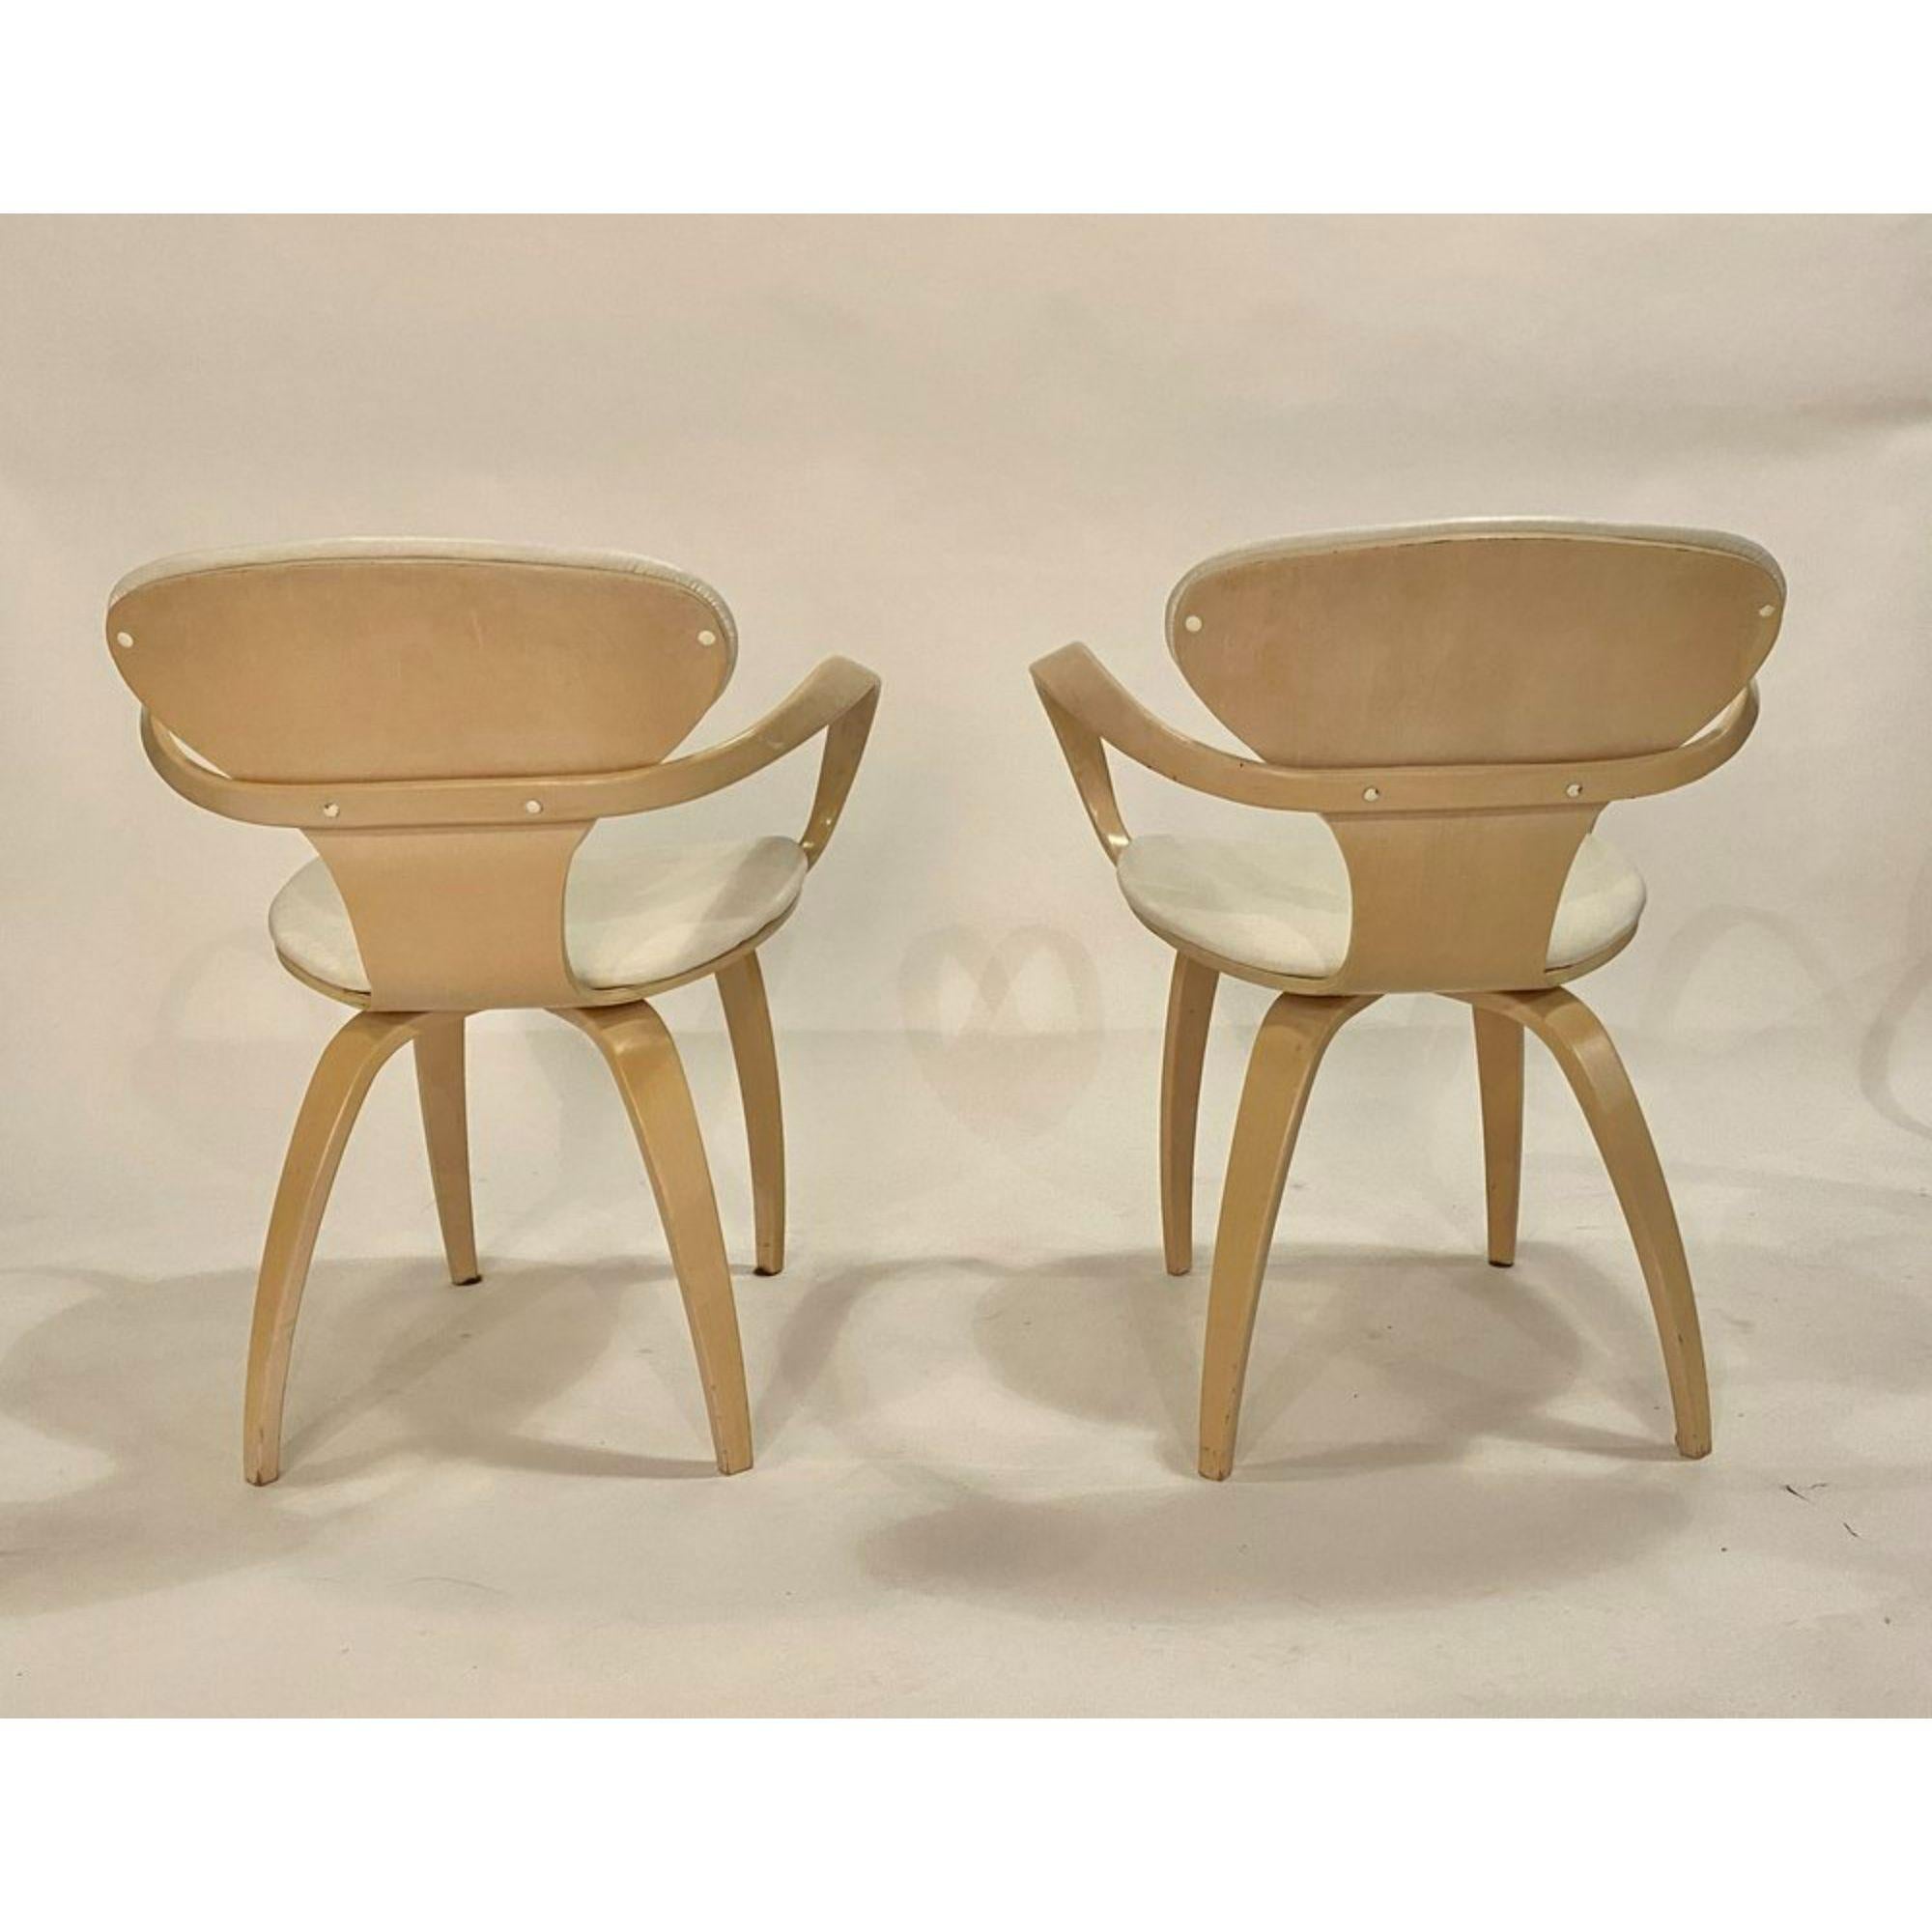 Norman Cherner Pretzel Chairs in Leather and Wood Frame by Plycraft, Set of 4 In Good Condition For Sale In Chicago, IL